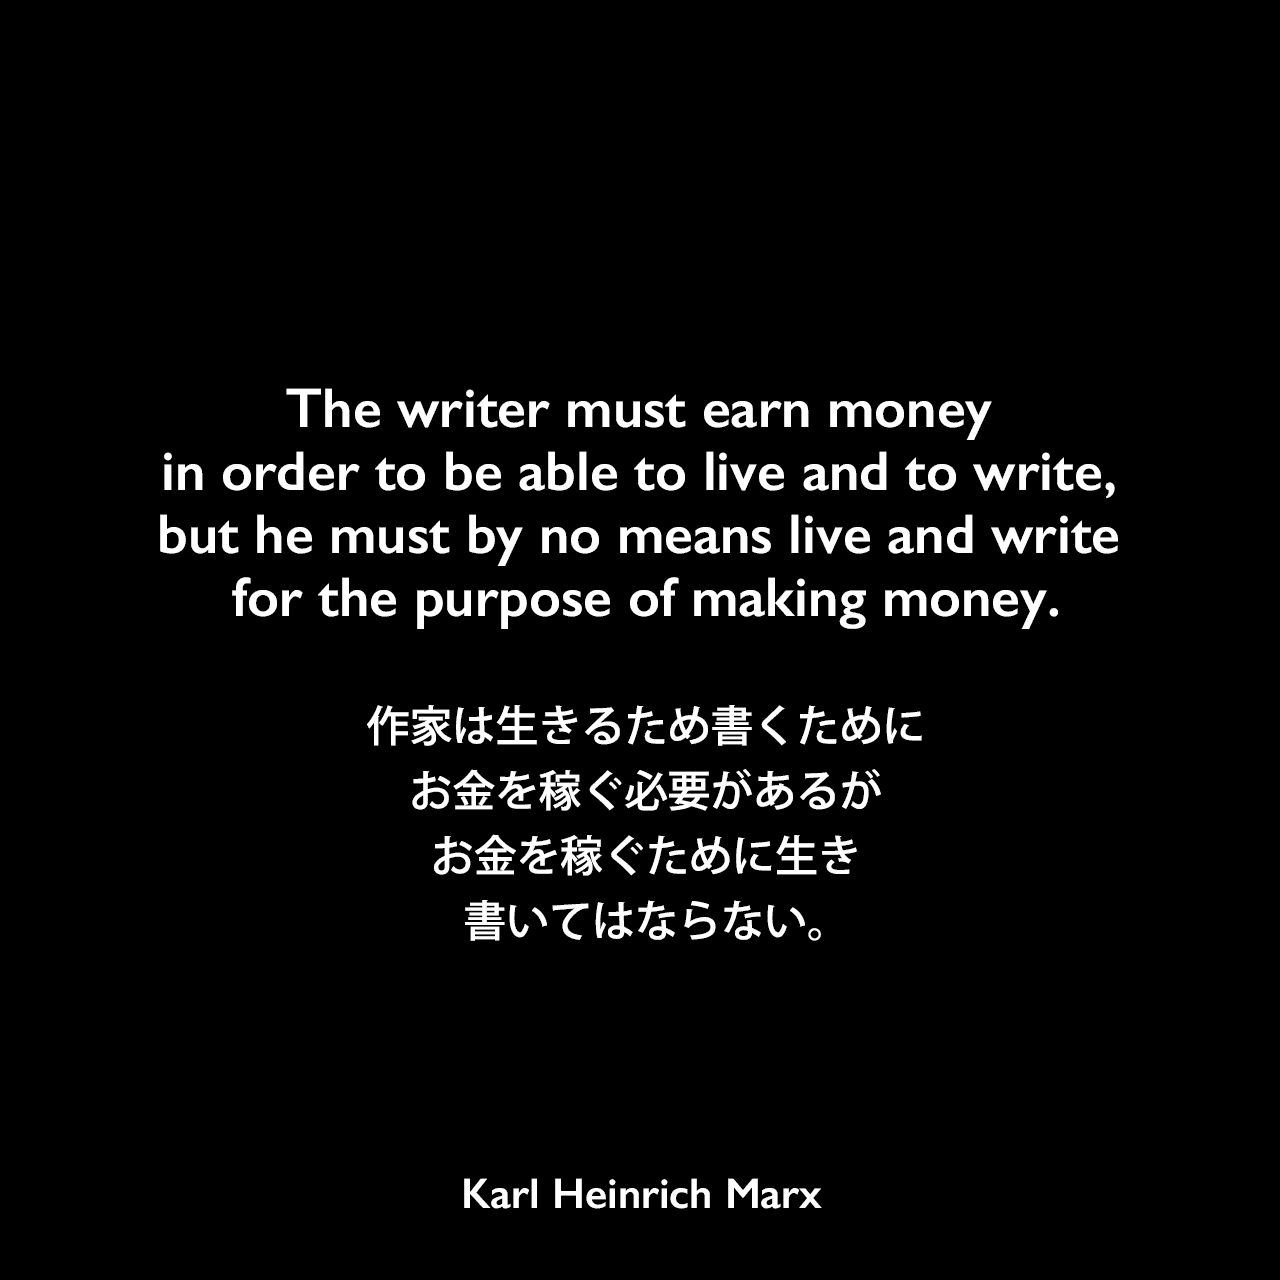 The writer must earn money in order to be able to live and to write, but he must by no means live and write for the purpose of making money.作家は生きるため書くためにお金を稼ぐ必要があるが、お金を稼ぐために生き書いてはならない。Karl Heinrich Marx